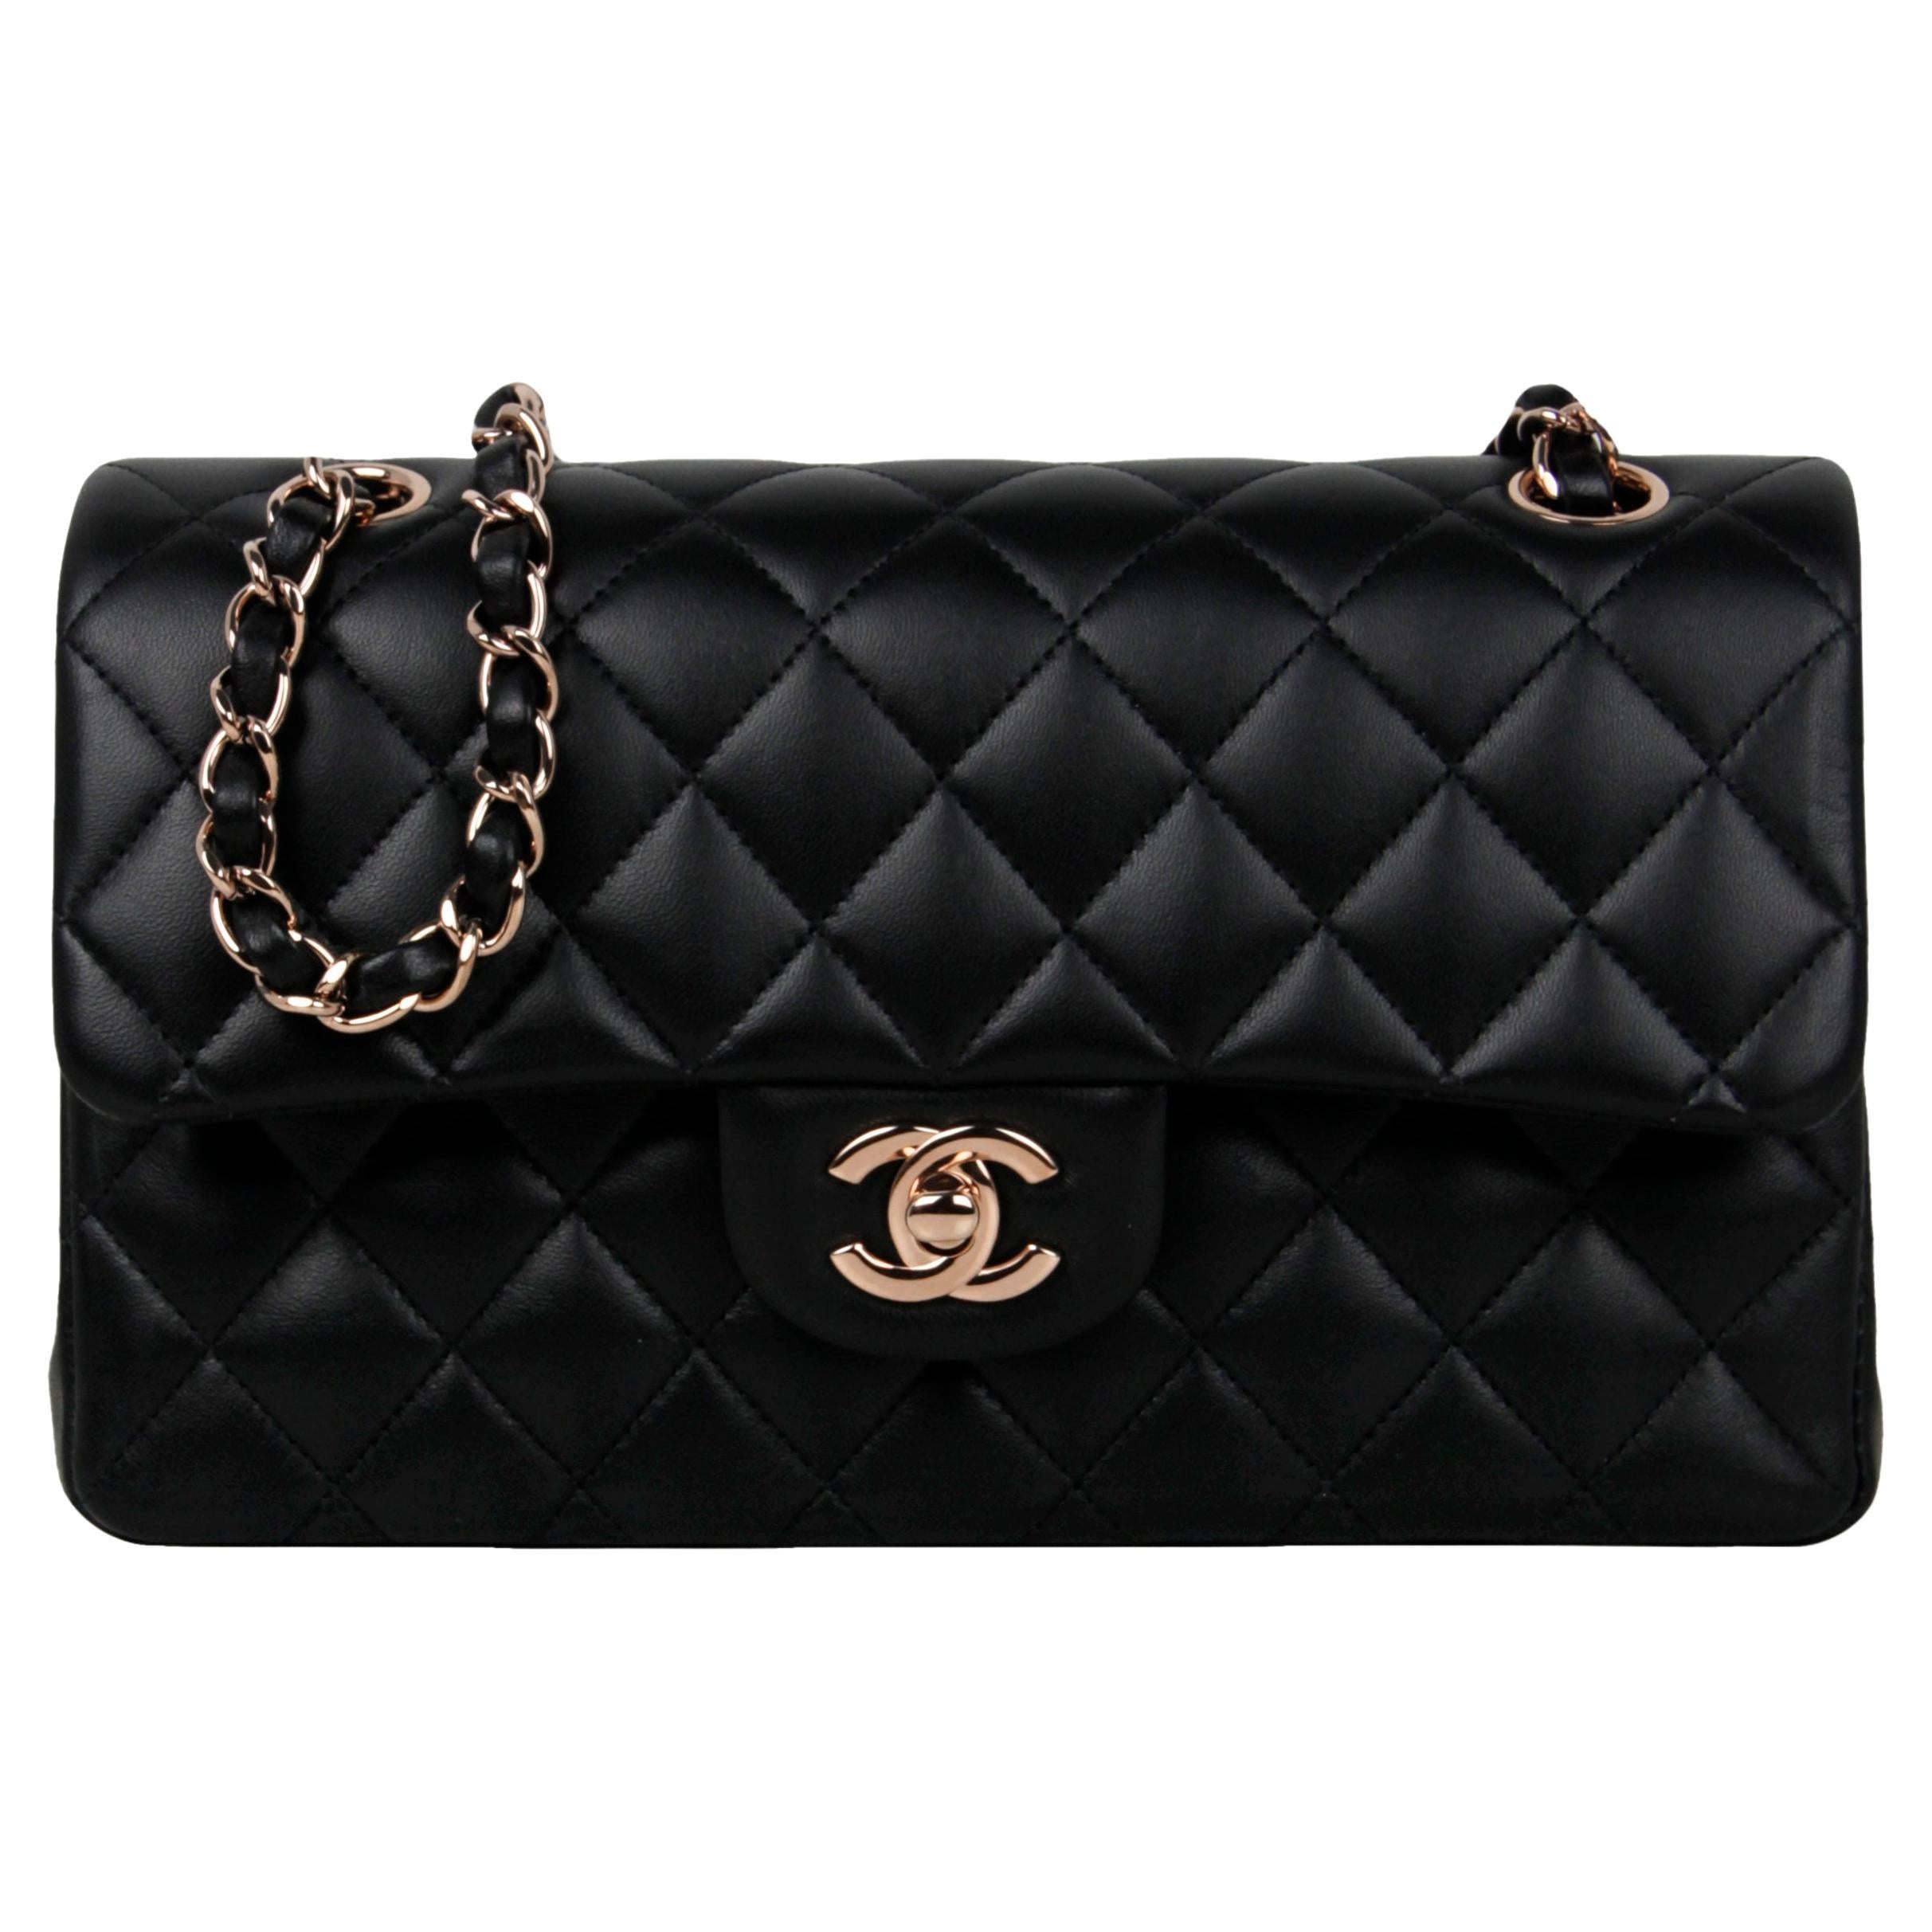 Chanel Black Lambskin Leather Double Flap Small Classic Bag w/ Rose Gold HW